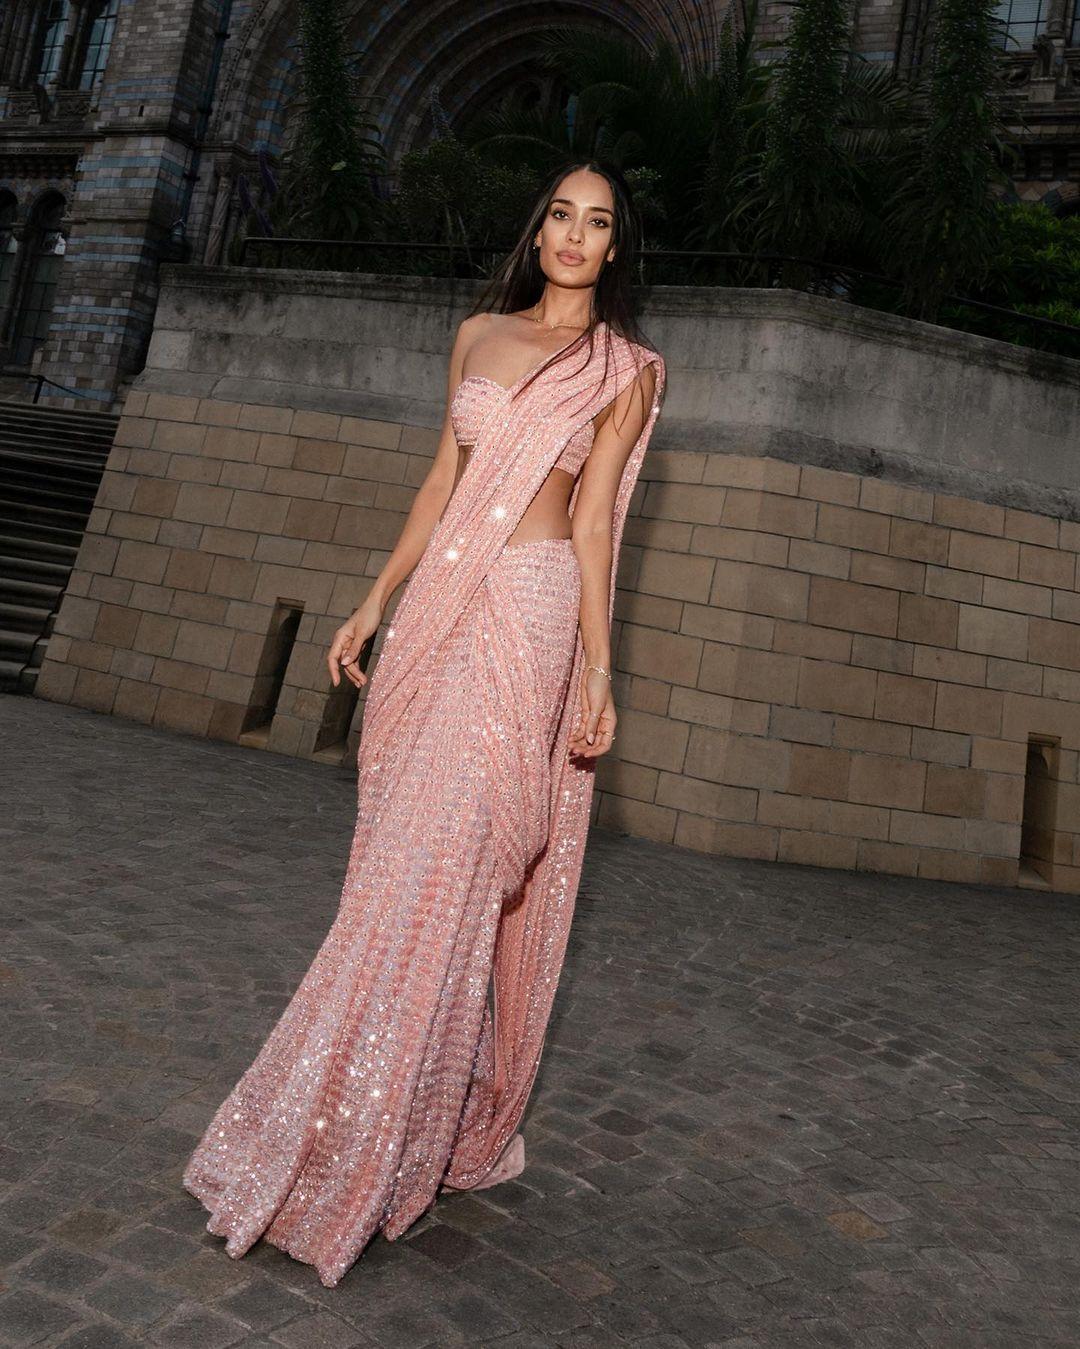 Pink perfection: Lisa Haydon embraces glamour in a stunning saree with shimmering embellishments, courtesy of Arpita Mehta